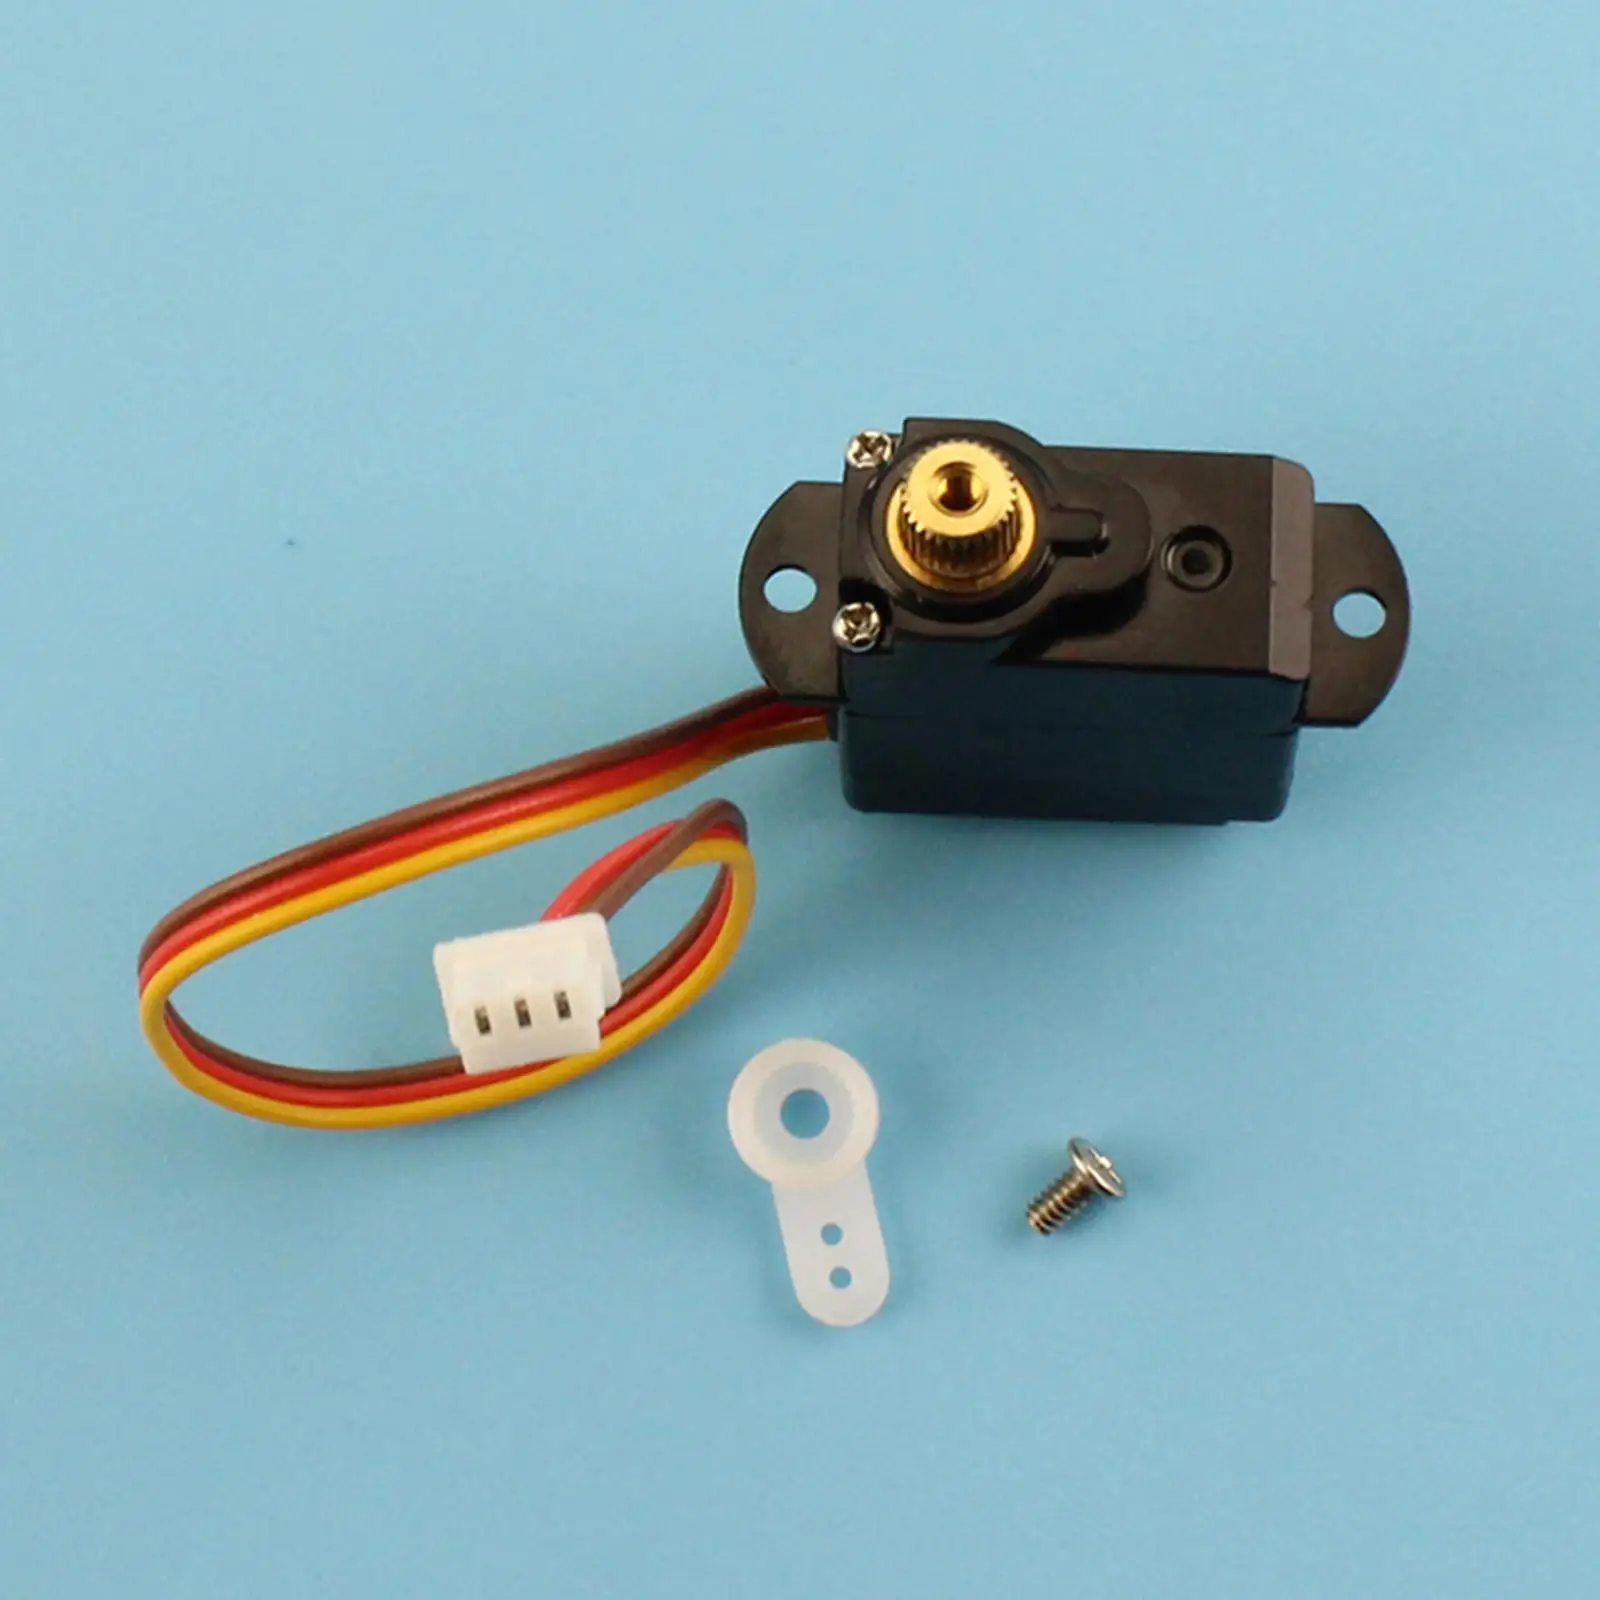 RC Aircraft Servo Spare Part Portable for Upgrade Parts Replaces DIY Accs